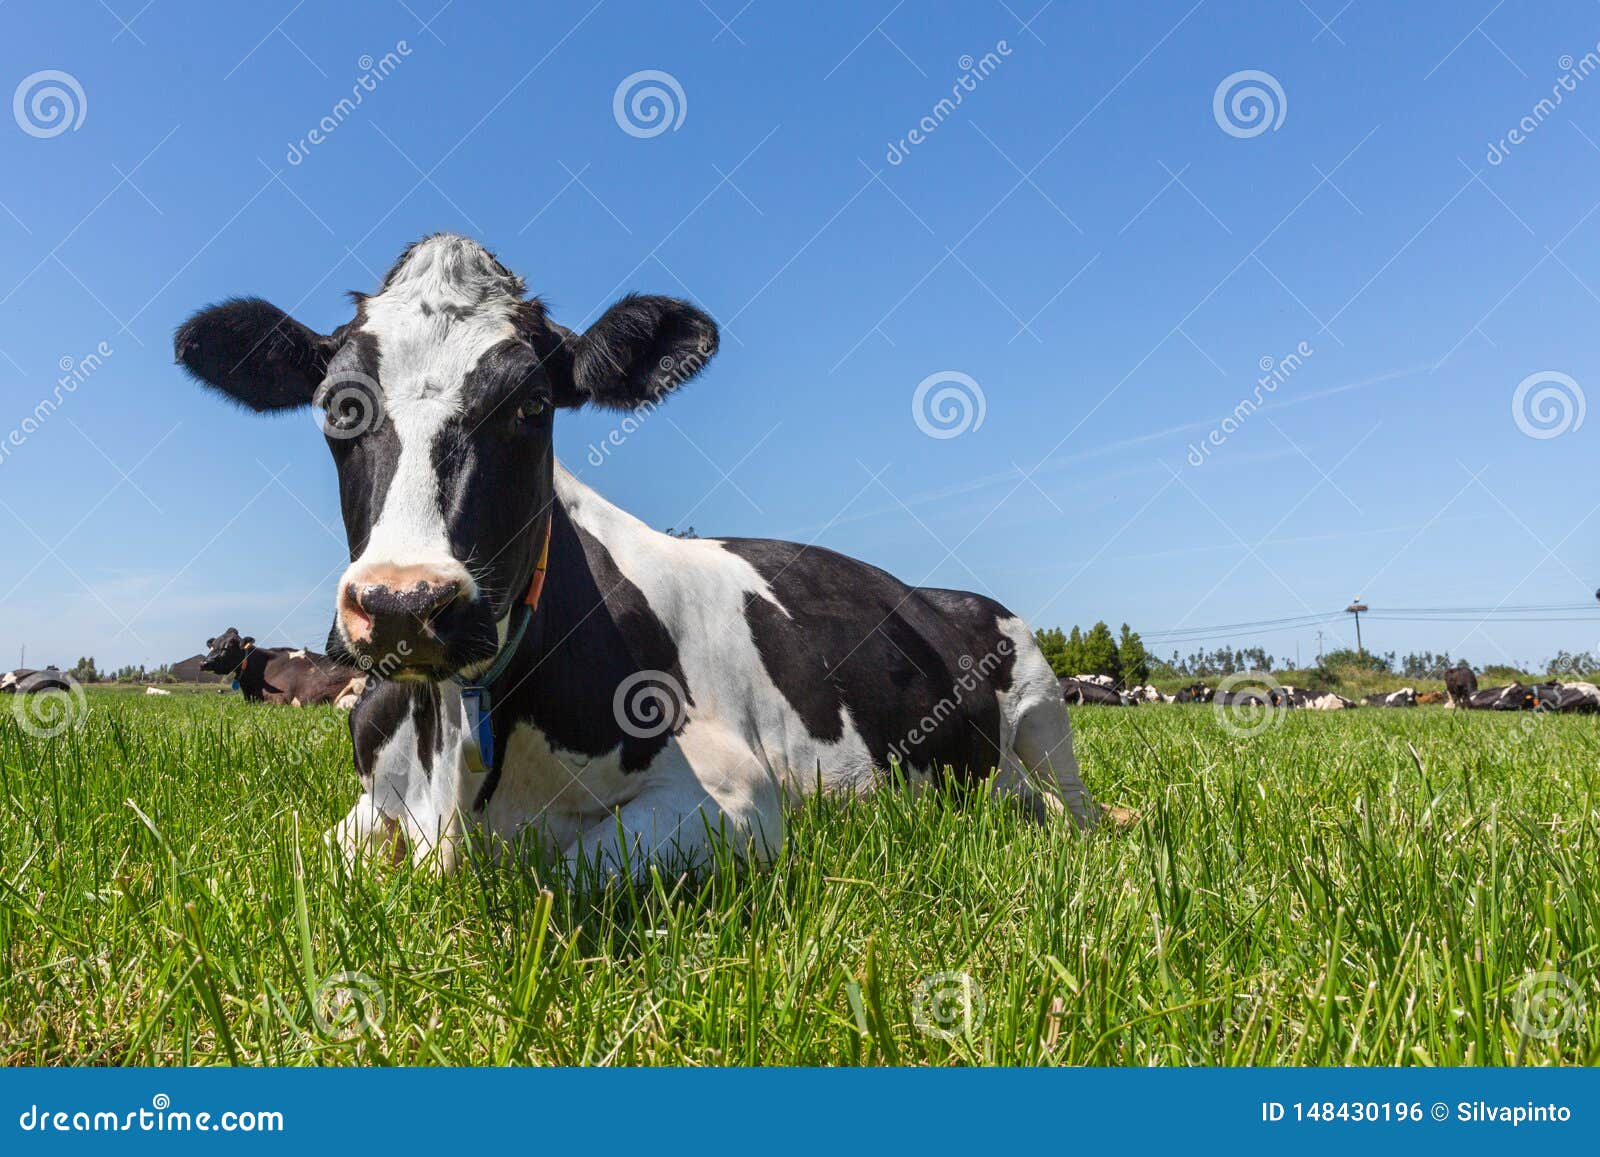 Friesian Holstein Dairy Cow Lying on Green Grass Stock Photo - Image of ...